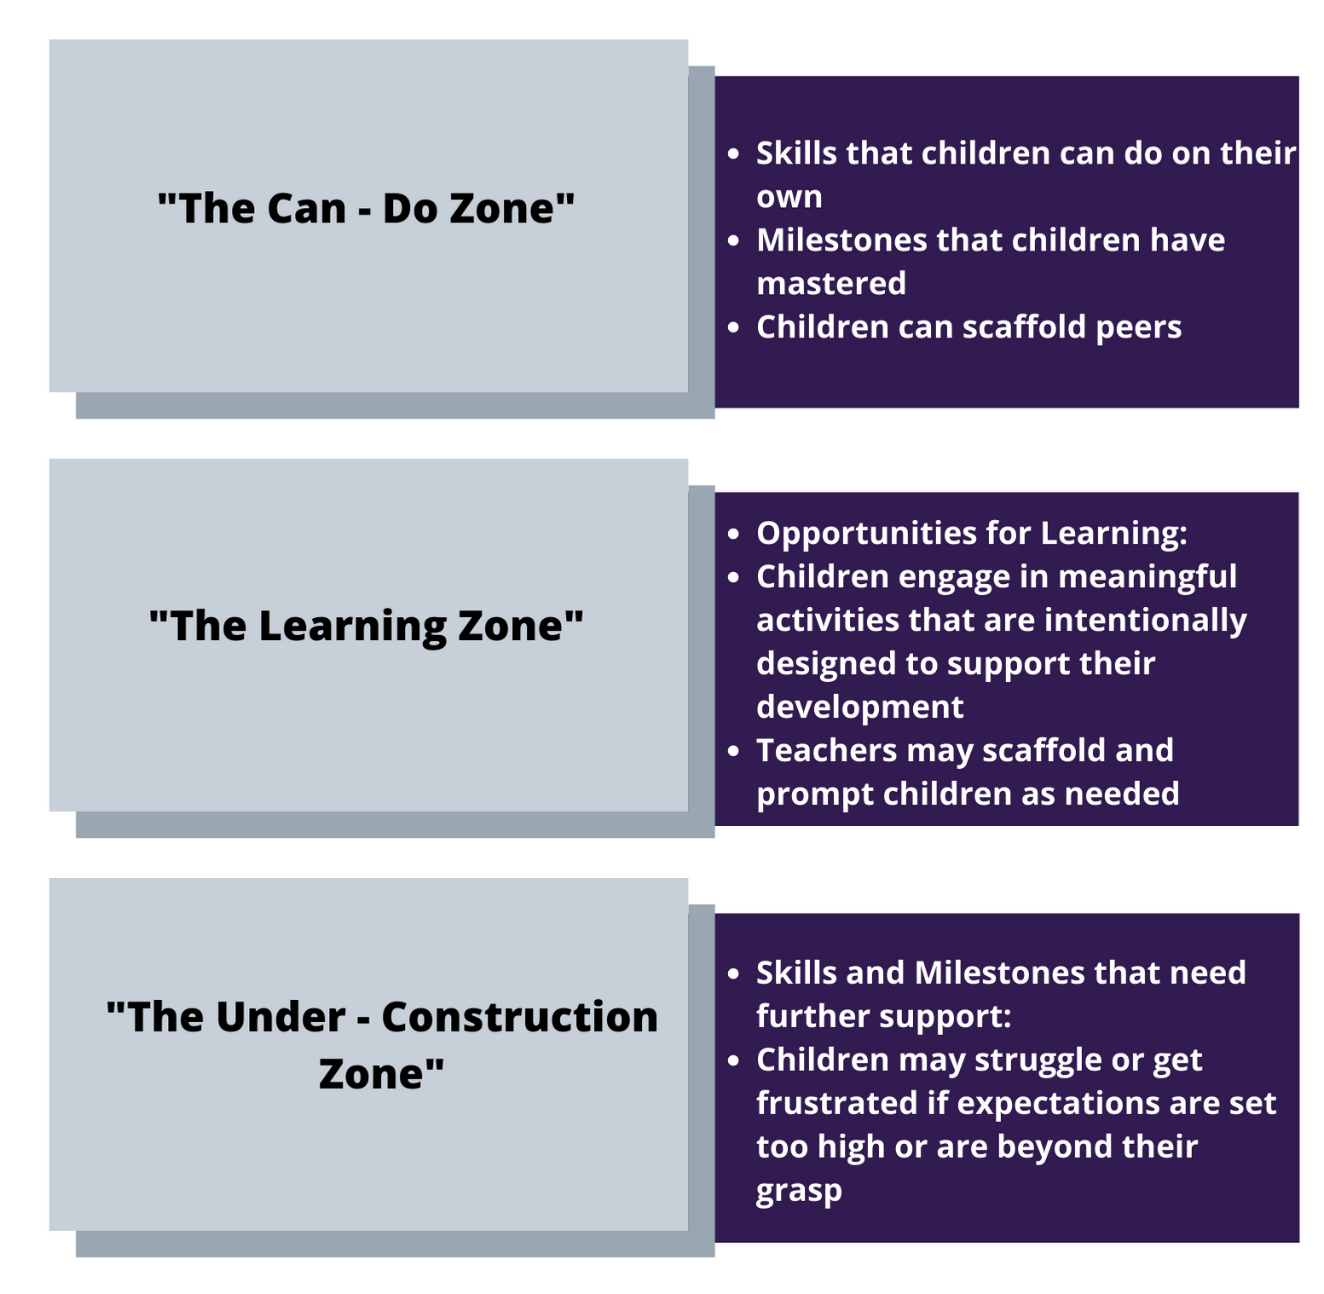 “The Can – Do Zone”: Skills that children can do on their own
Milestones that children have mastered Children can scaffold peers

“The Learning Zone”: Opportunities for Learning:
Children engage in meaningful activities that are intentionally designed to support their development
Teachers may scaffold and prompt children as needed

"The Under - Construction Zone" 
Skills and Milestones that need further support:
Children may struggle or get frustrated if expectations are set too high or are beyond their grasp
